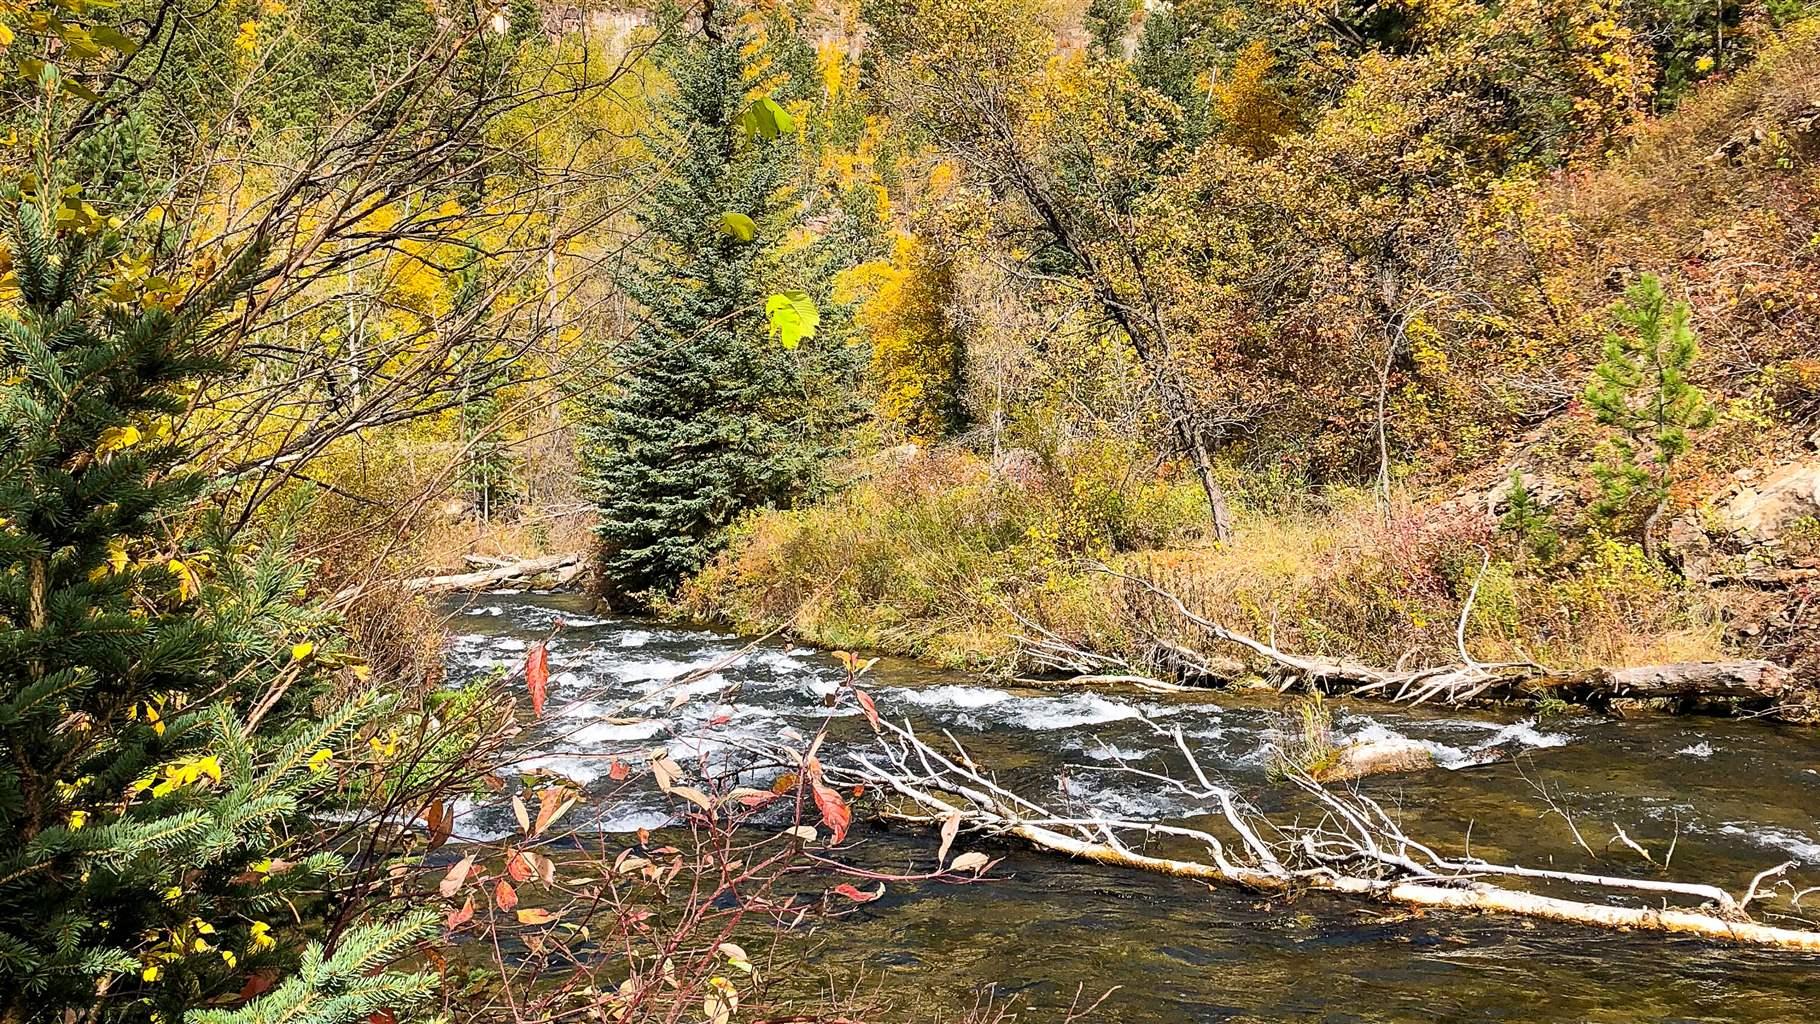 Fall colors pop along Spearfish Creek in the Black Hills National Forest.